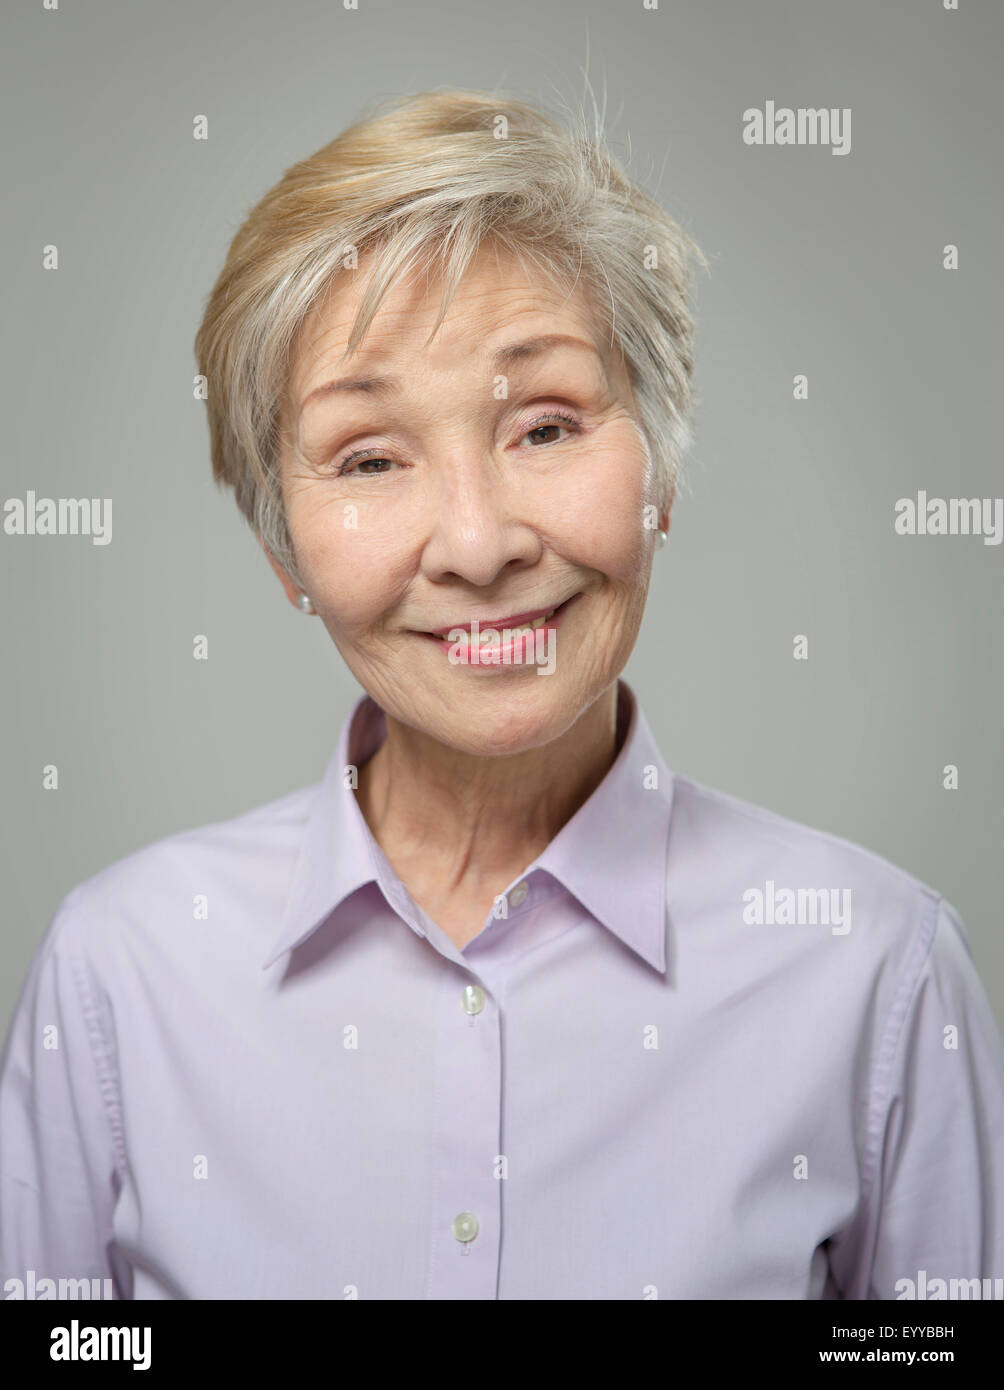 Close up of older Japanese woman smiling Stock Photo